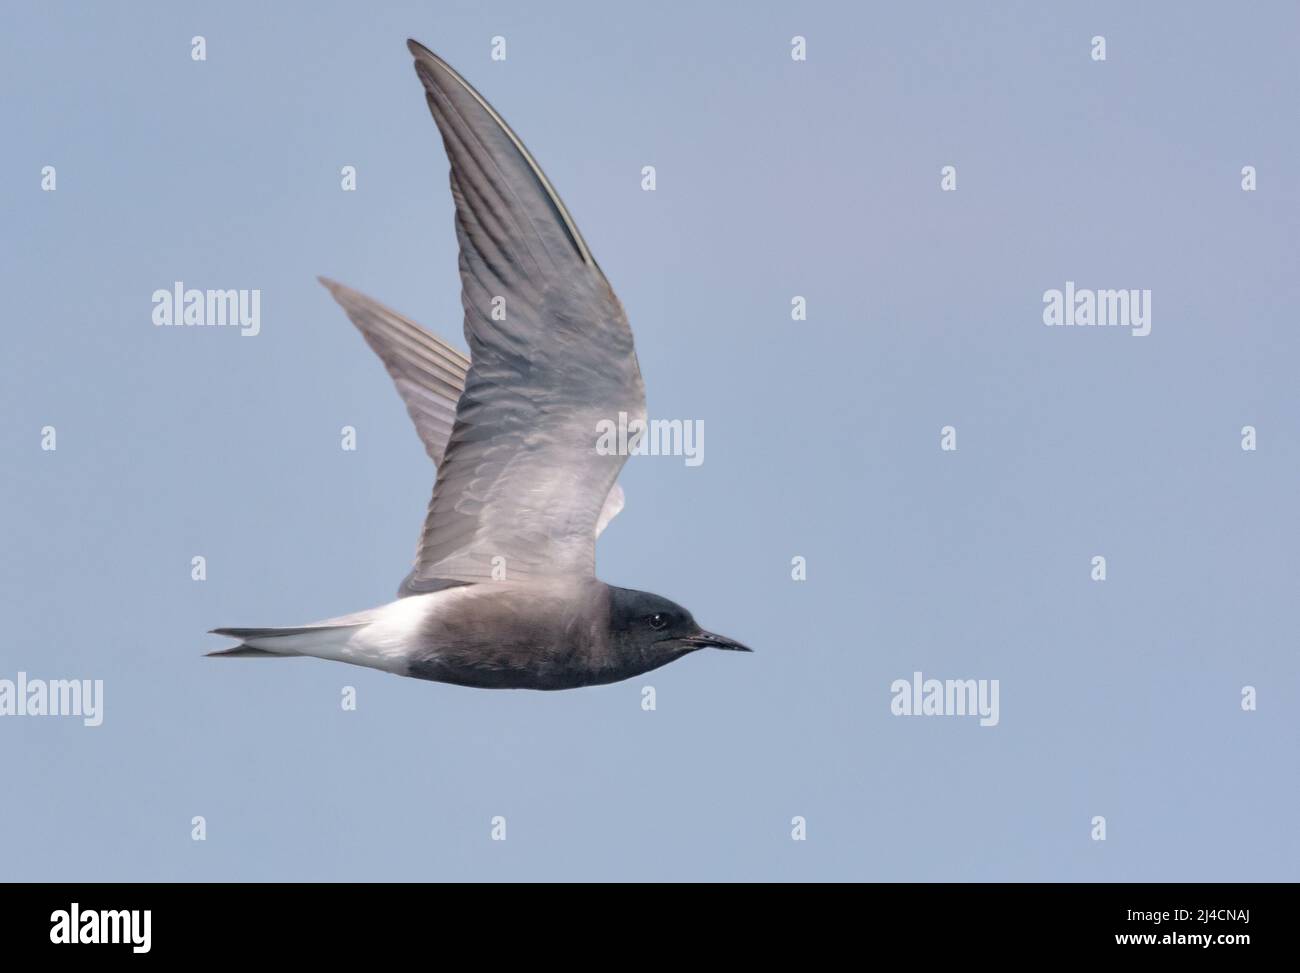 Adult Black tern (Chlidonias niger) flying in blue sky with spreaded wings Stock Photo